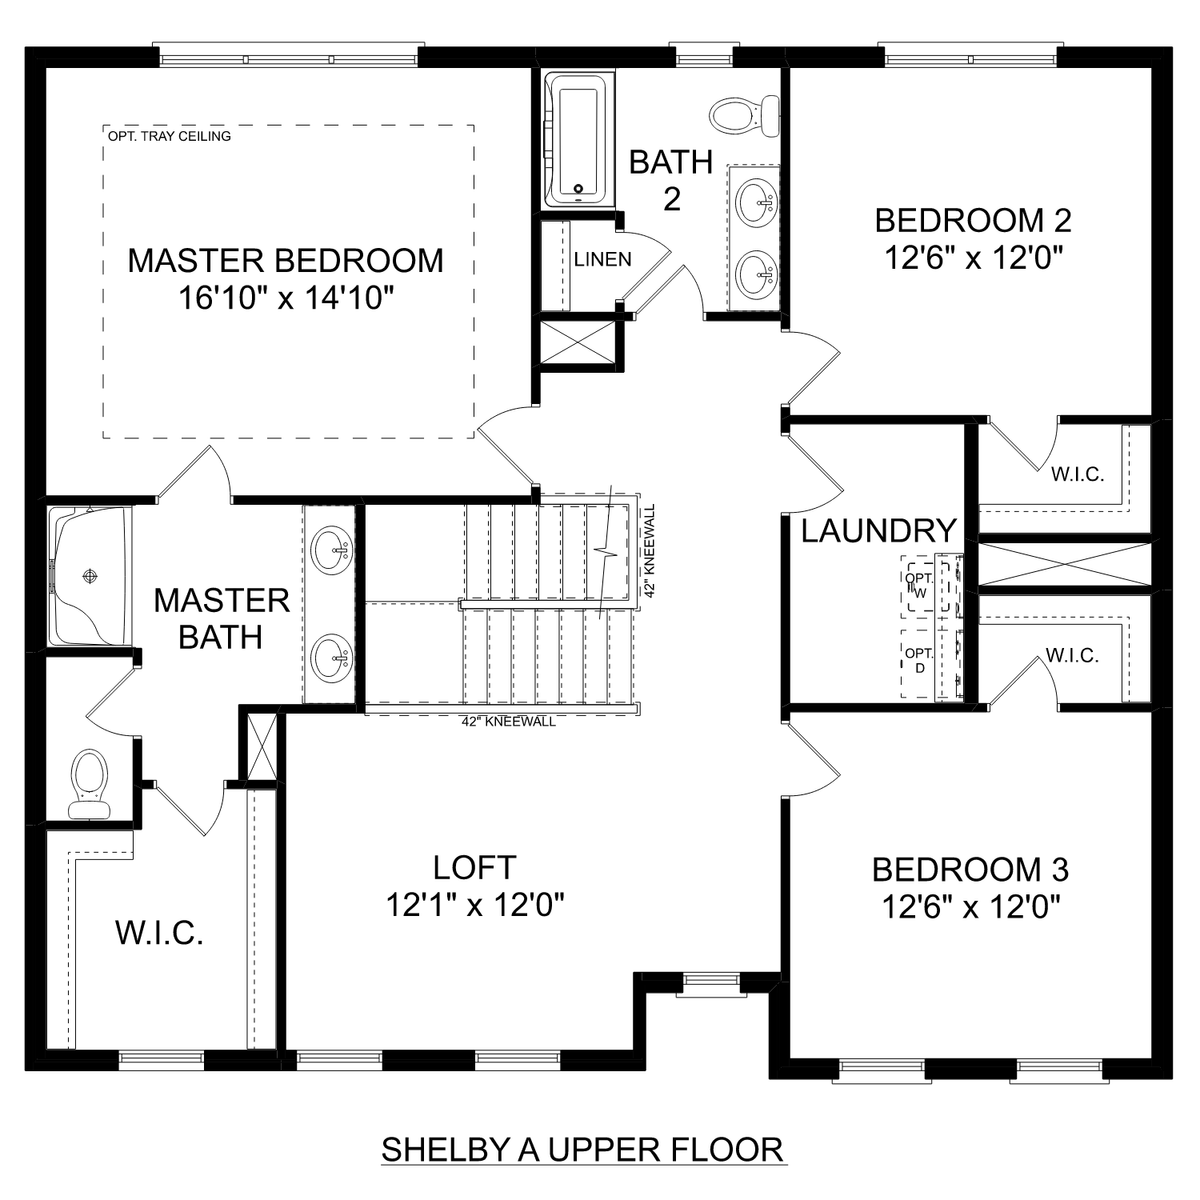 2 - The Shelby A floor plan layout for 115 Wilcot Road in Davidson Homes' Walker's Hill community.